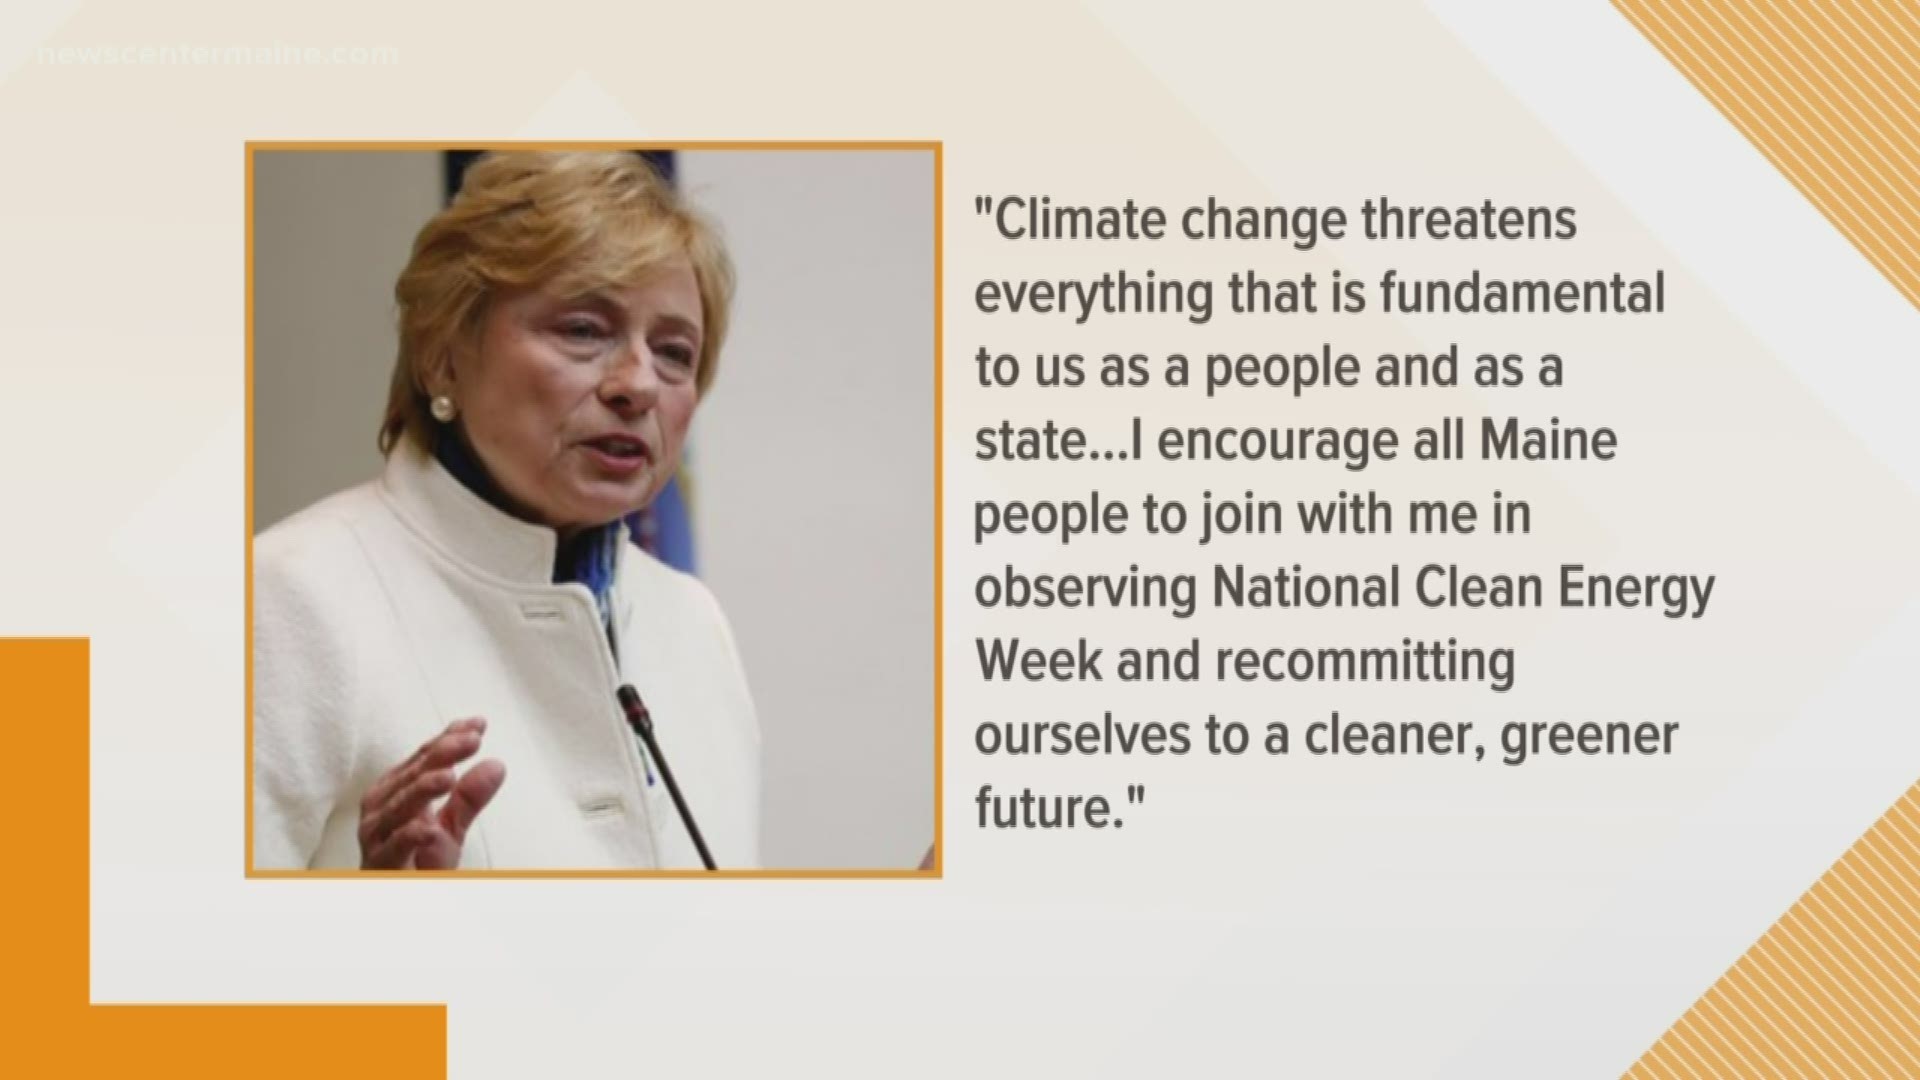 Governor Janet Mills takes her fight of combatting climate change to the UN.